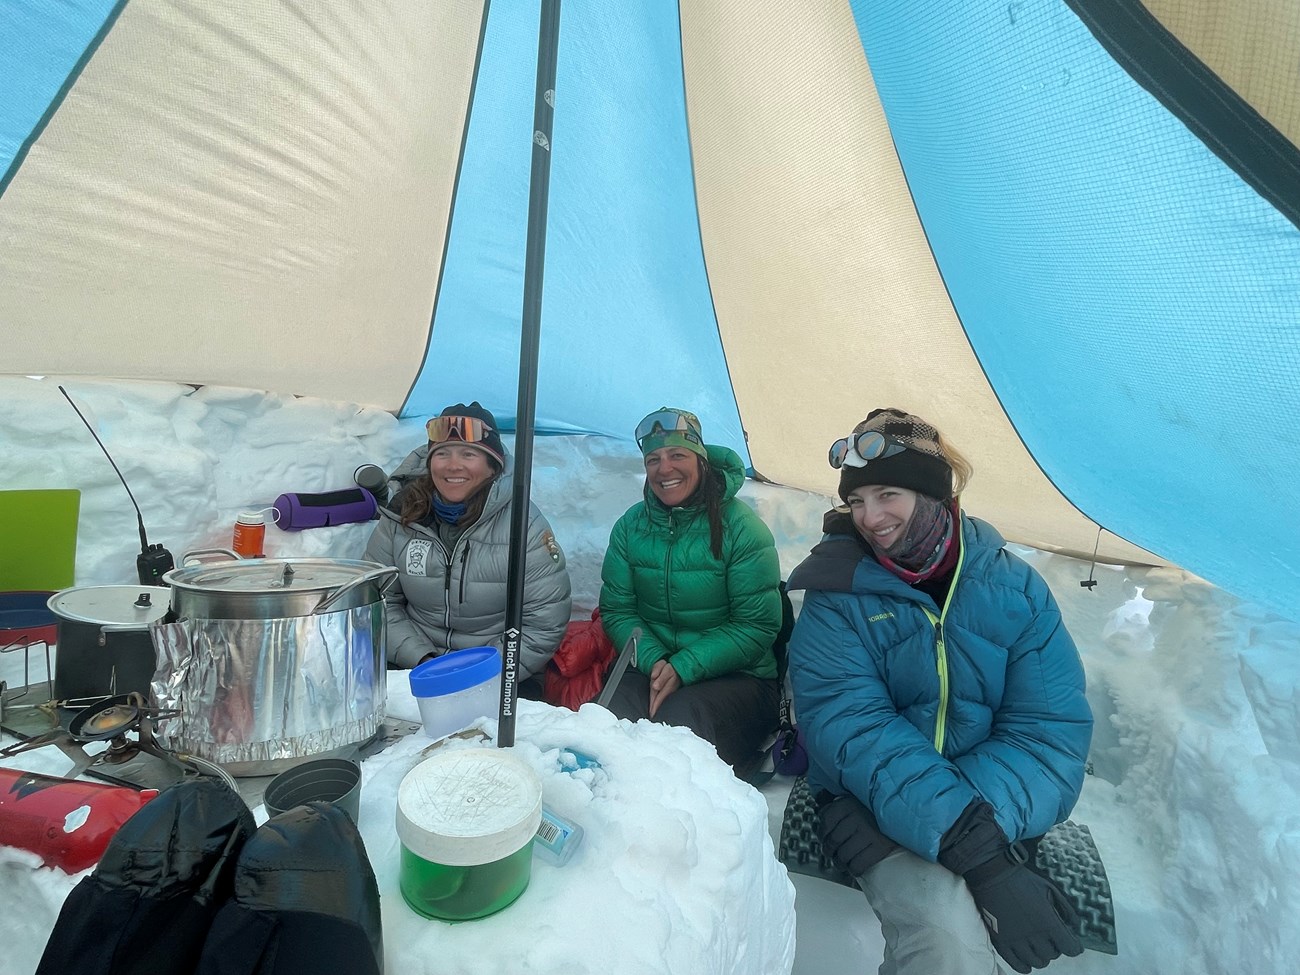 Three smiling climbers sit in a tent around a cookstove